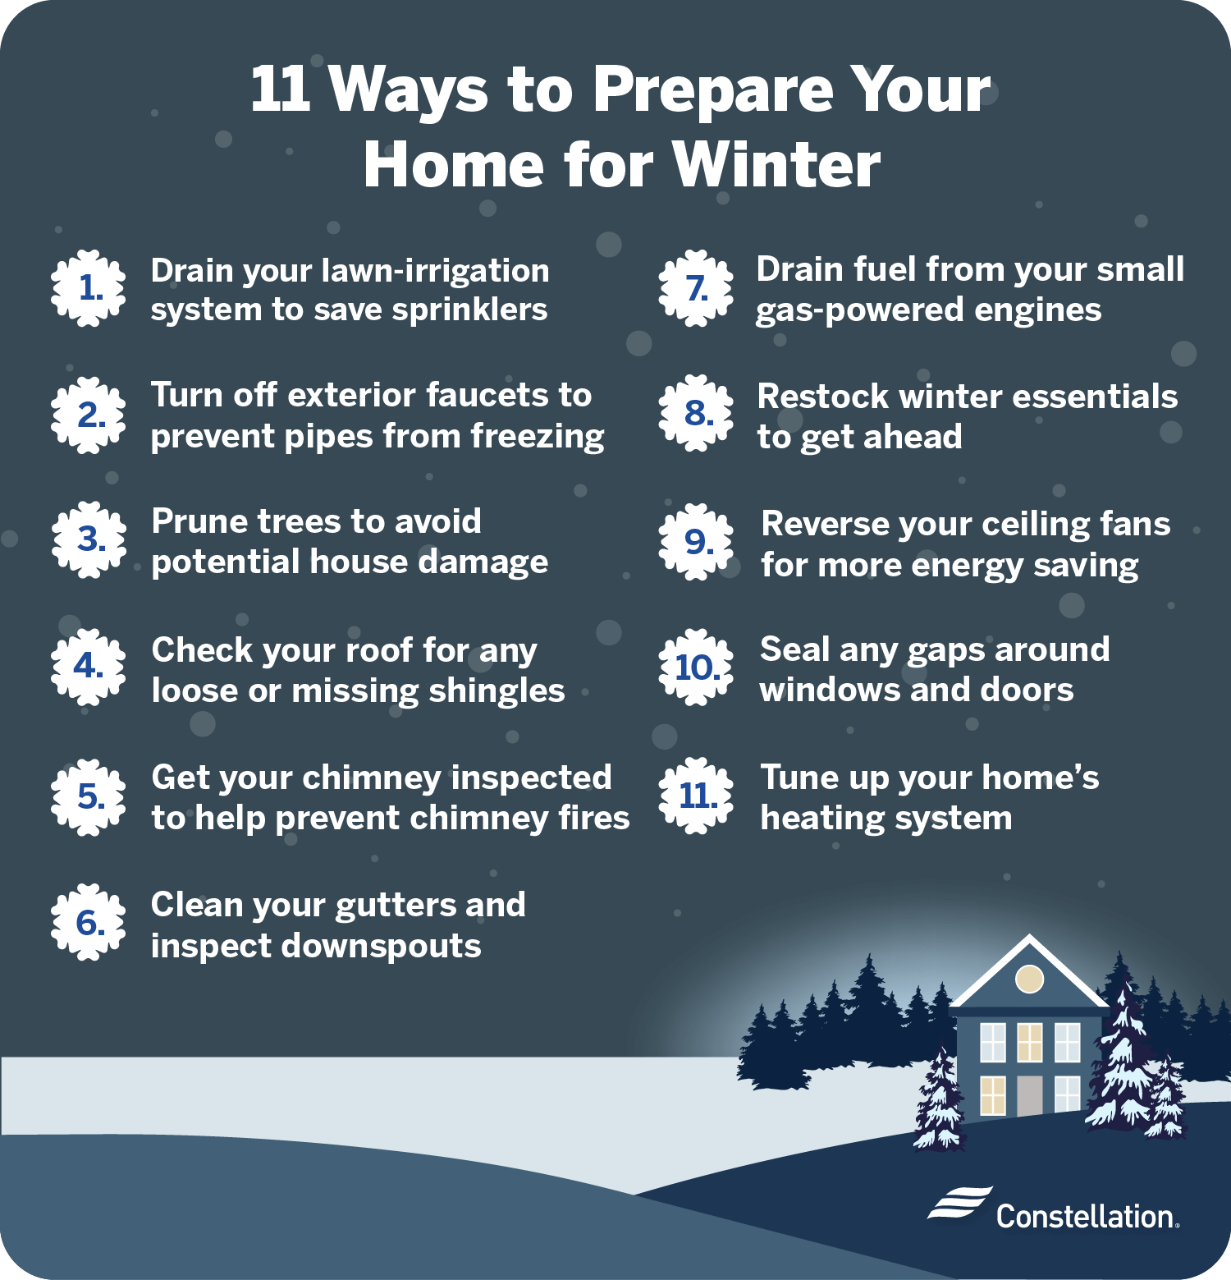 11 tips to prepare your home for winter